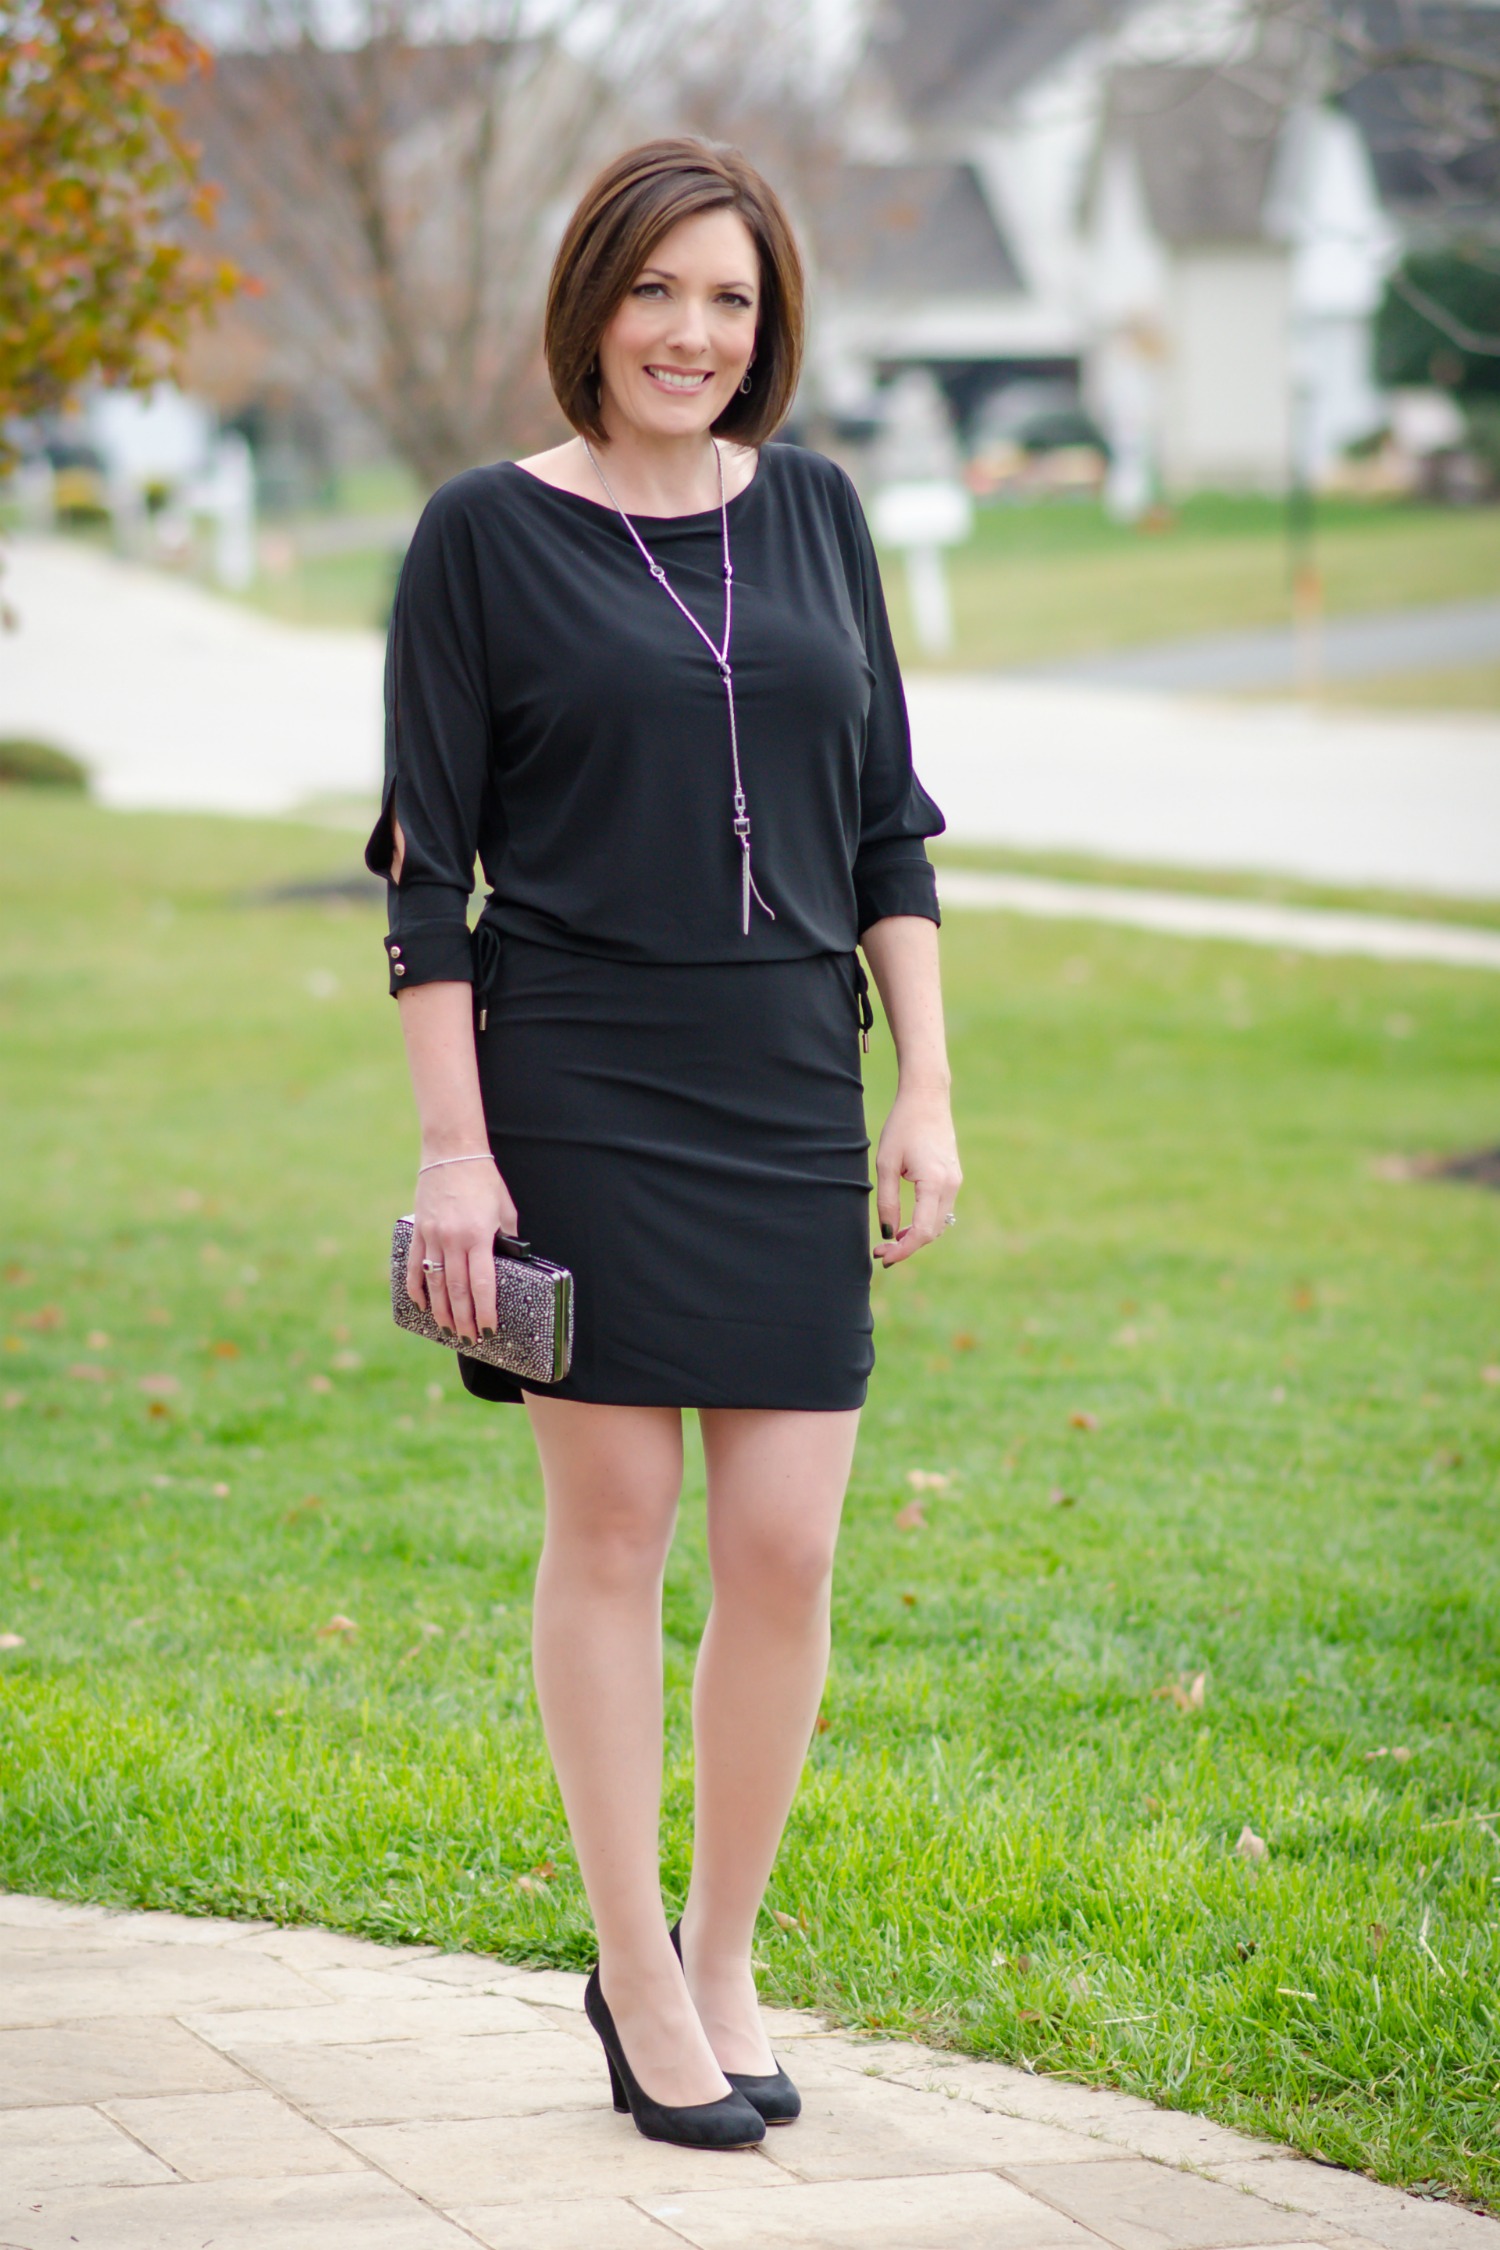 What to Wear to an Office Christmas Party: LBD with fun accessories and black suede pumps